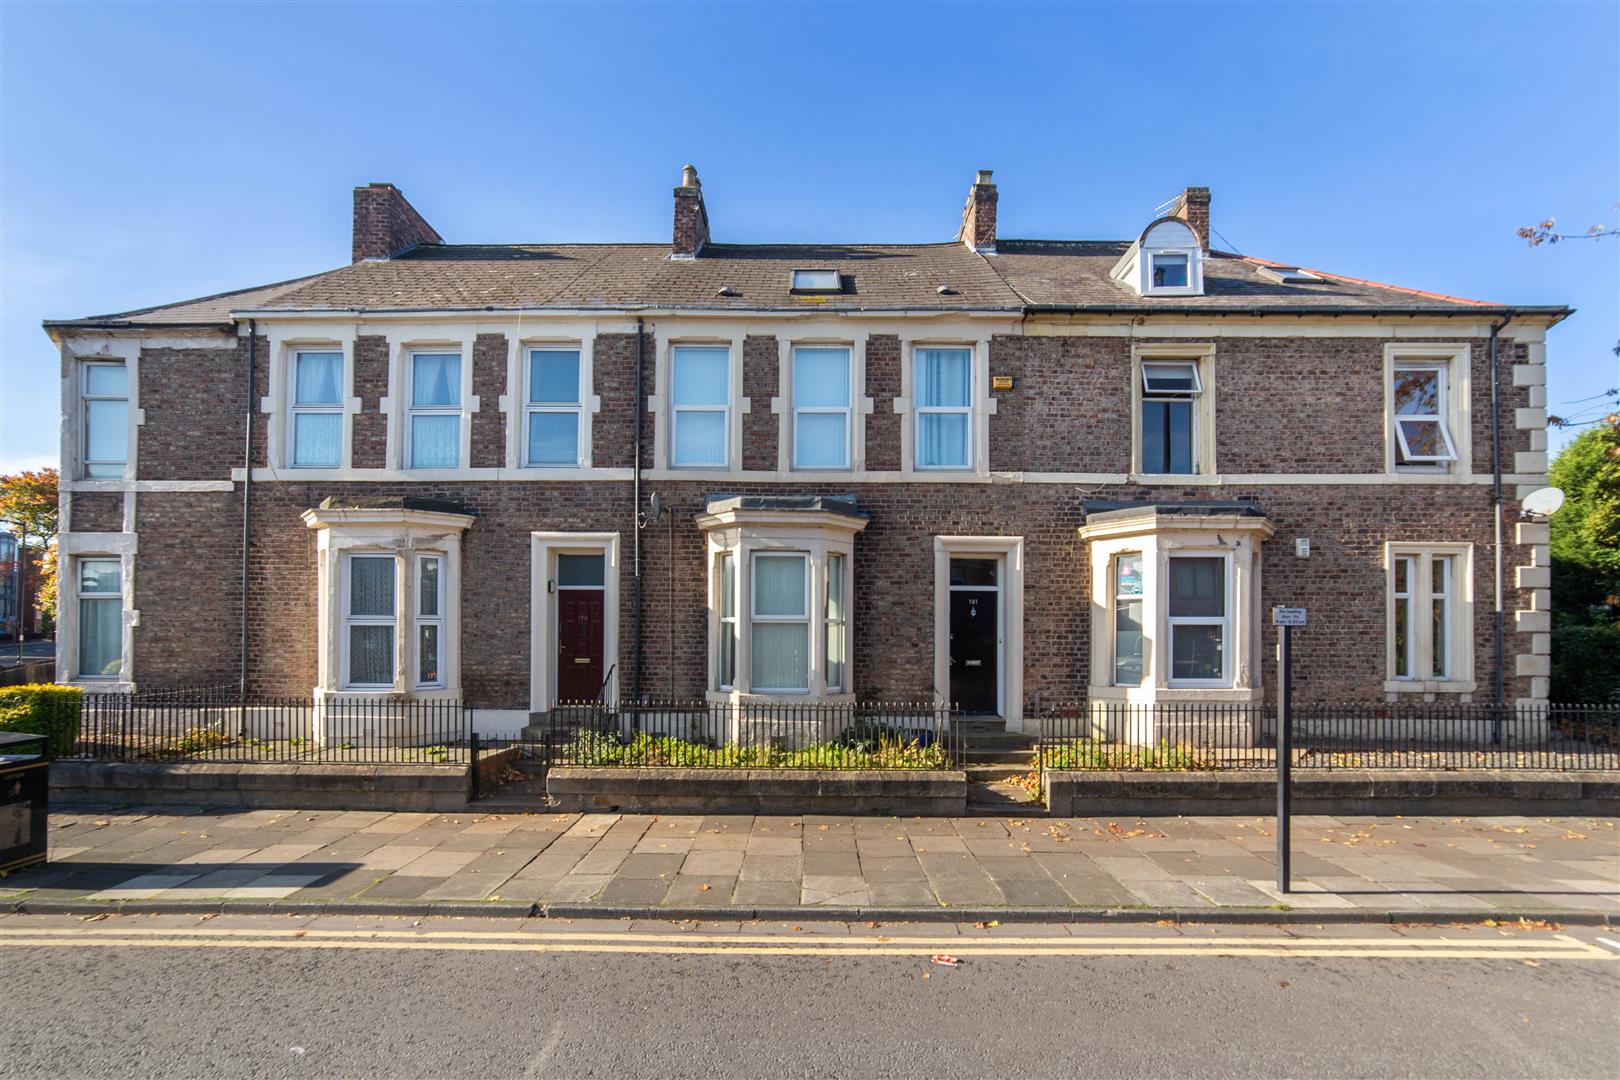 5 bed terraced house for sale in Portland Road, Sandyford - Property Image 1